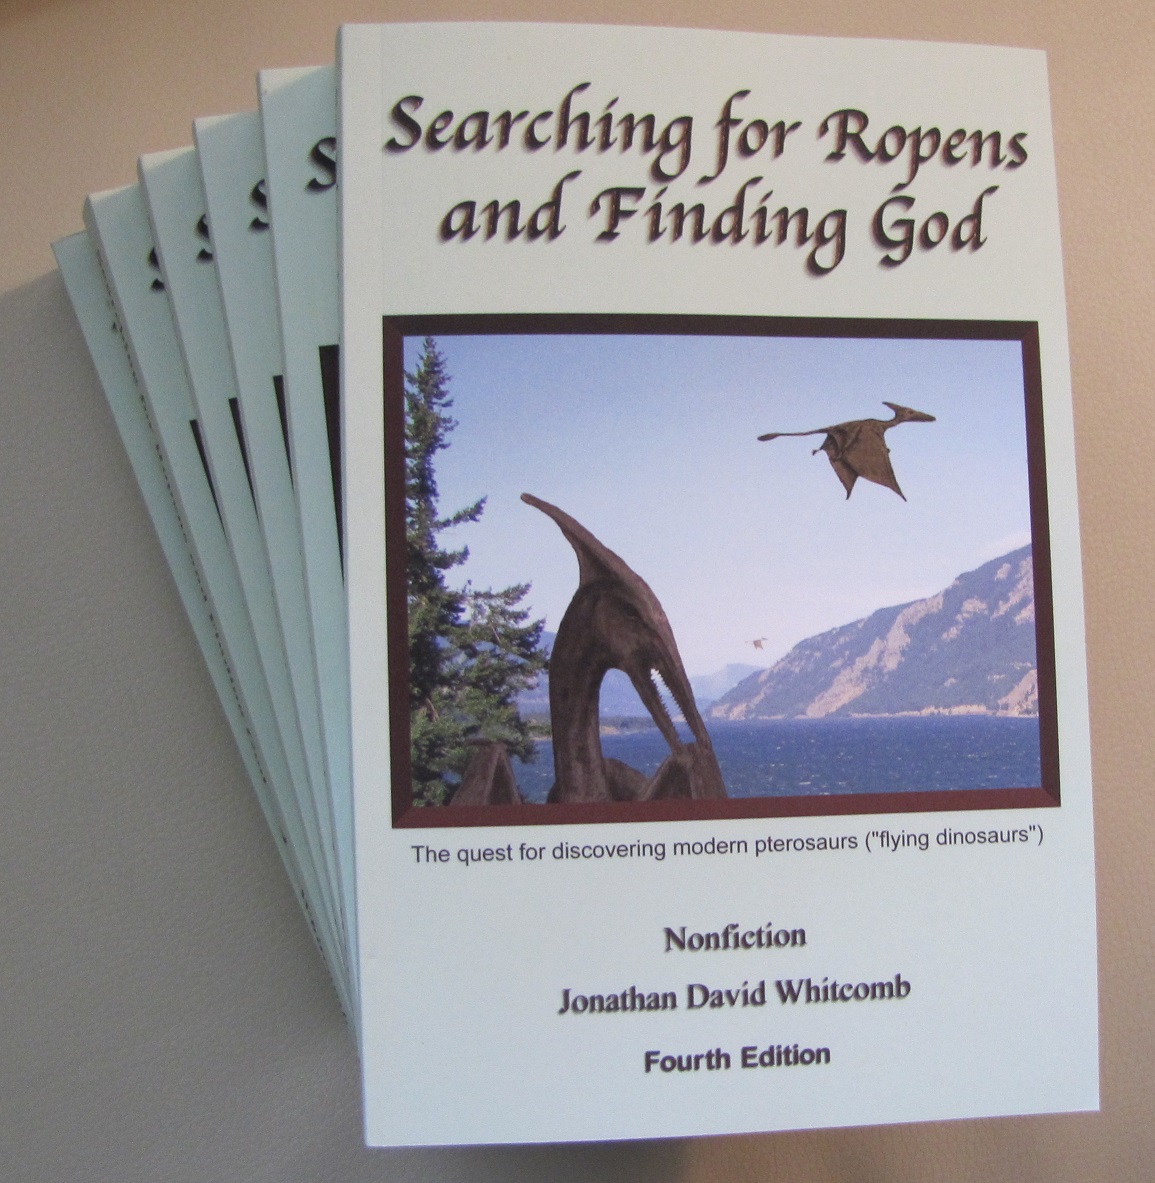 Whitcomb's nonfiction "Searching for Ropens and Finding God" 3rd ed.